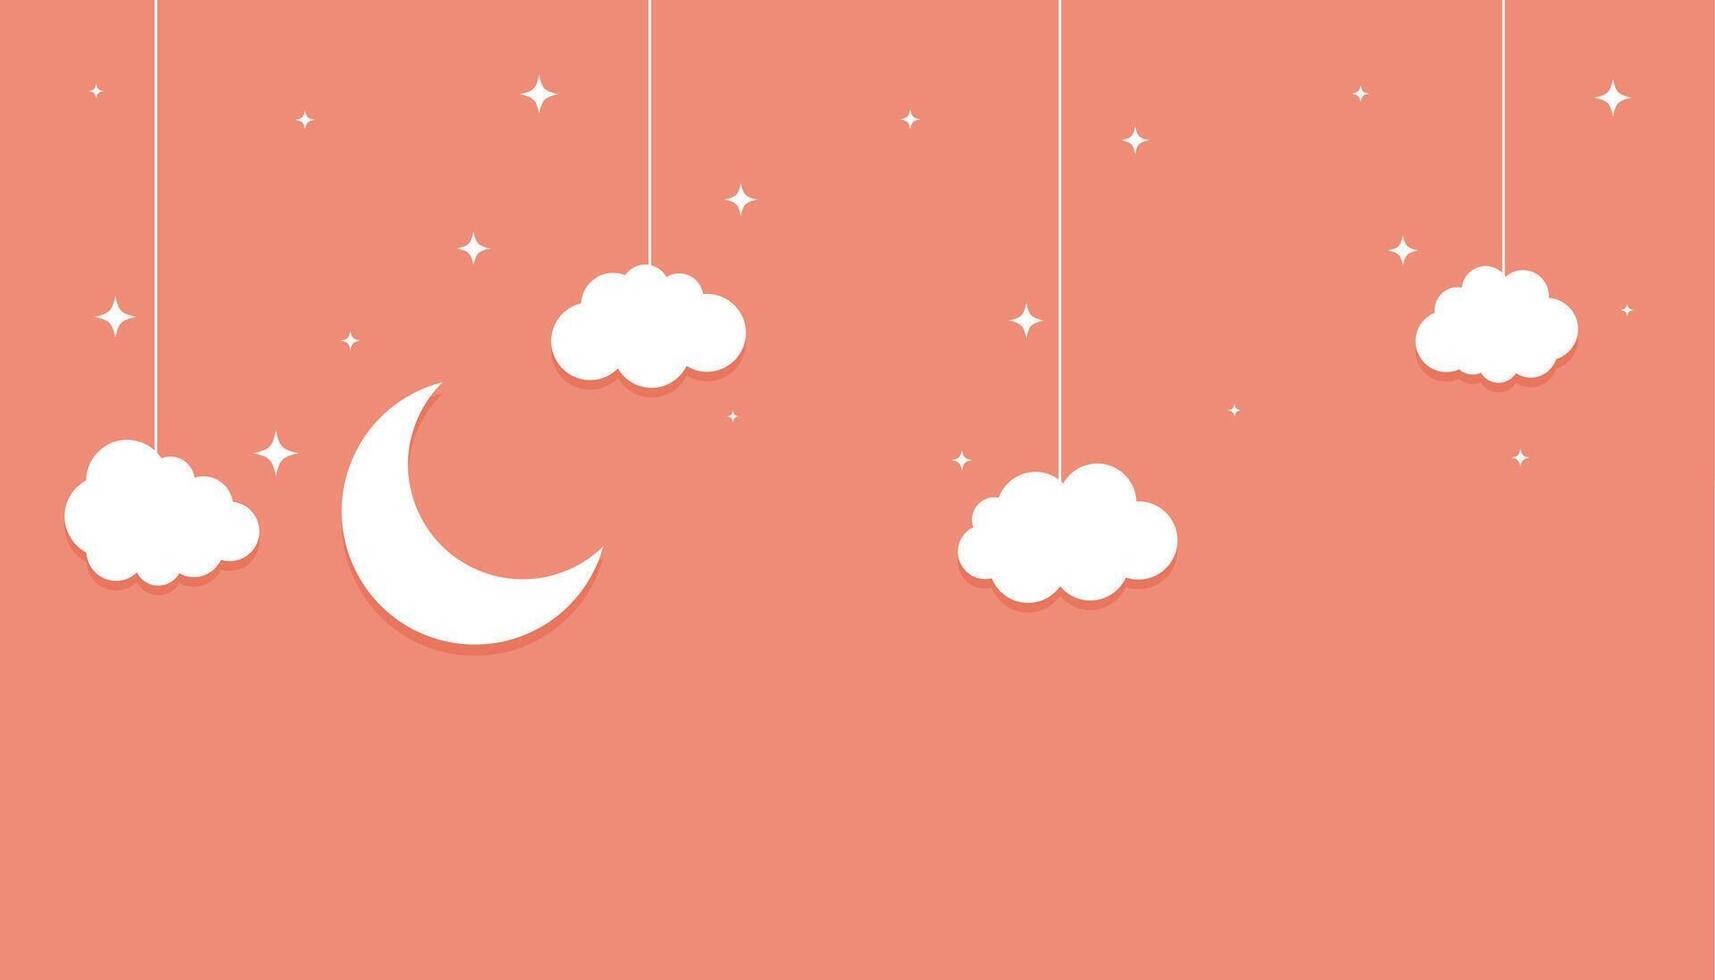 moon stars and clouds flat paperbut style background vector